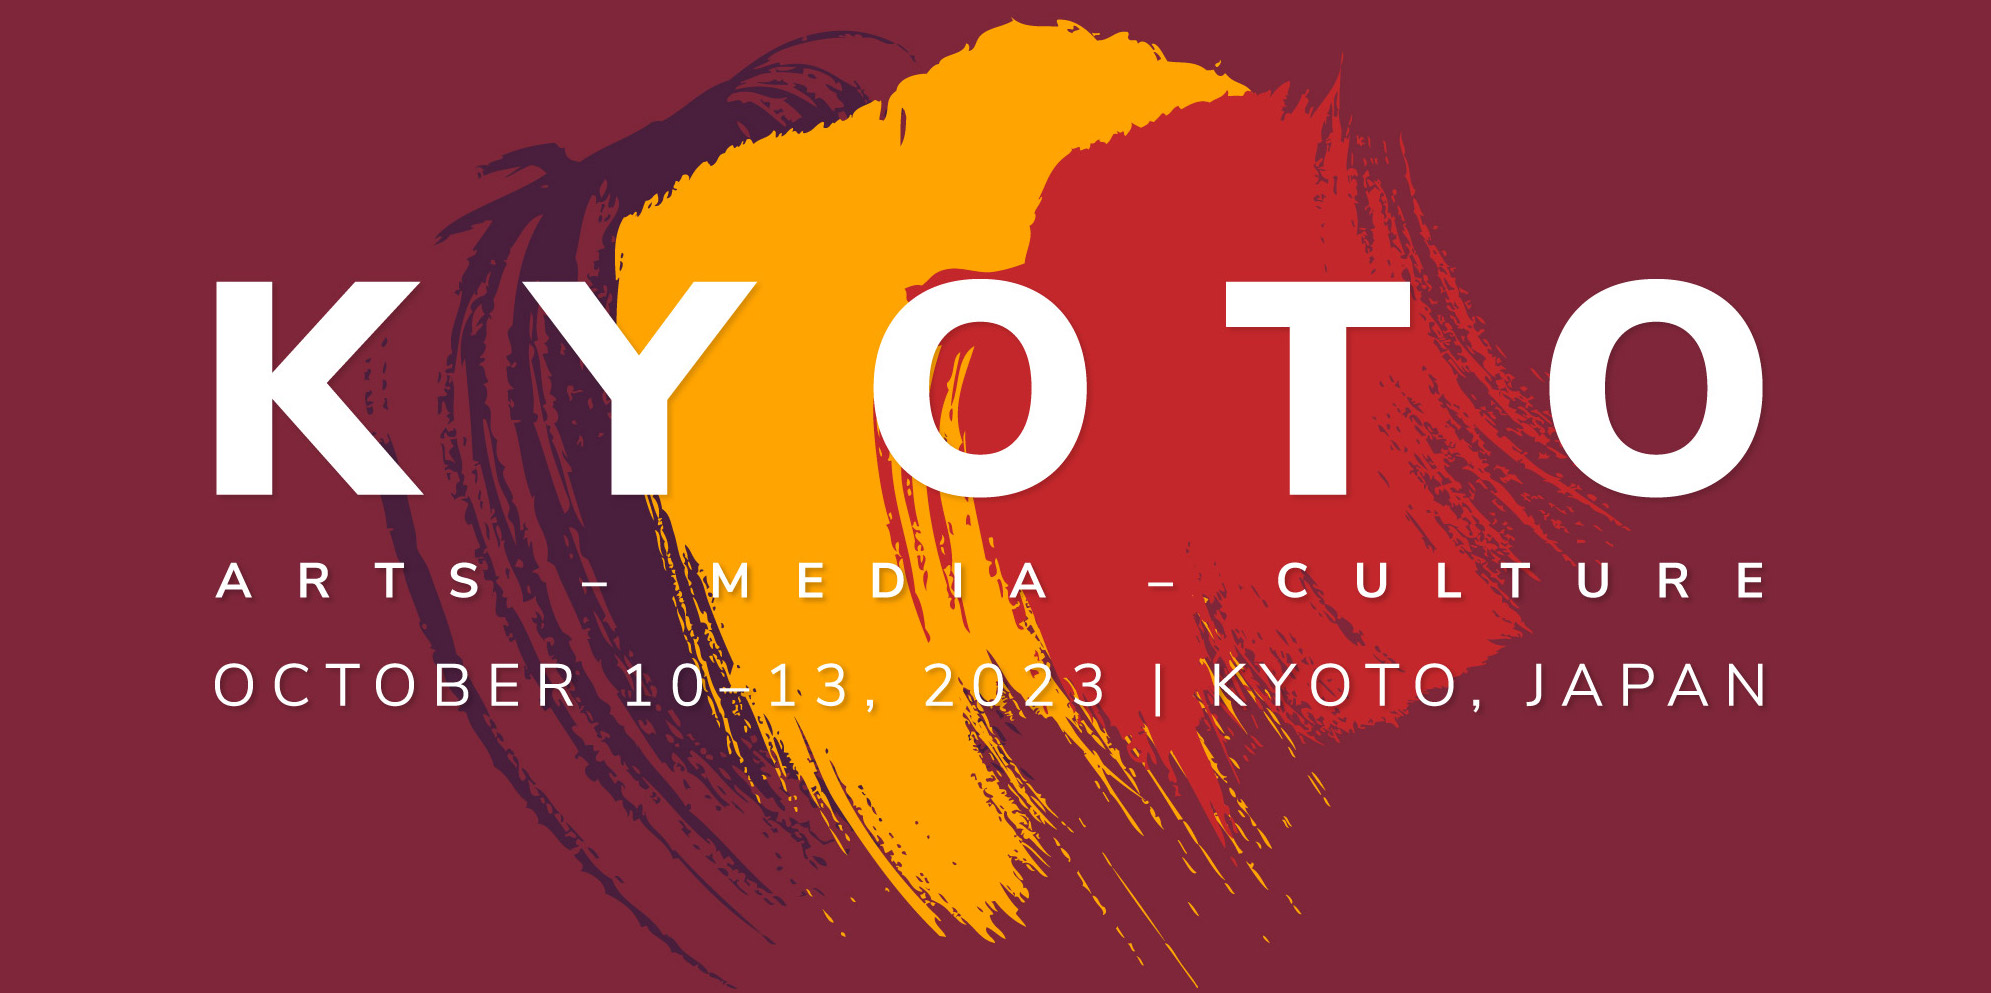 The 4th Kyoto Conference on Arts Media and Culture KAMC2023